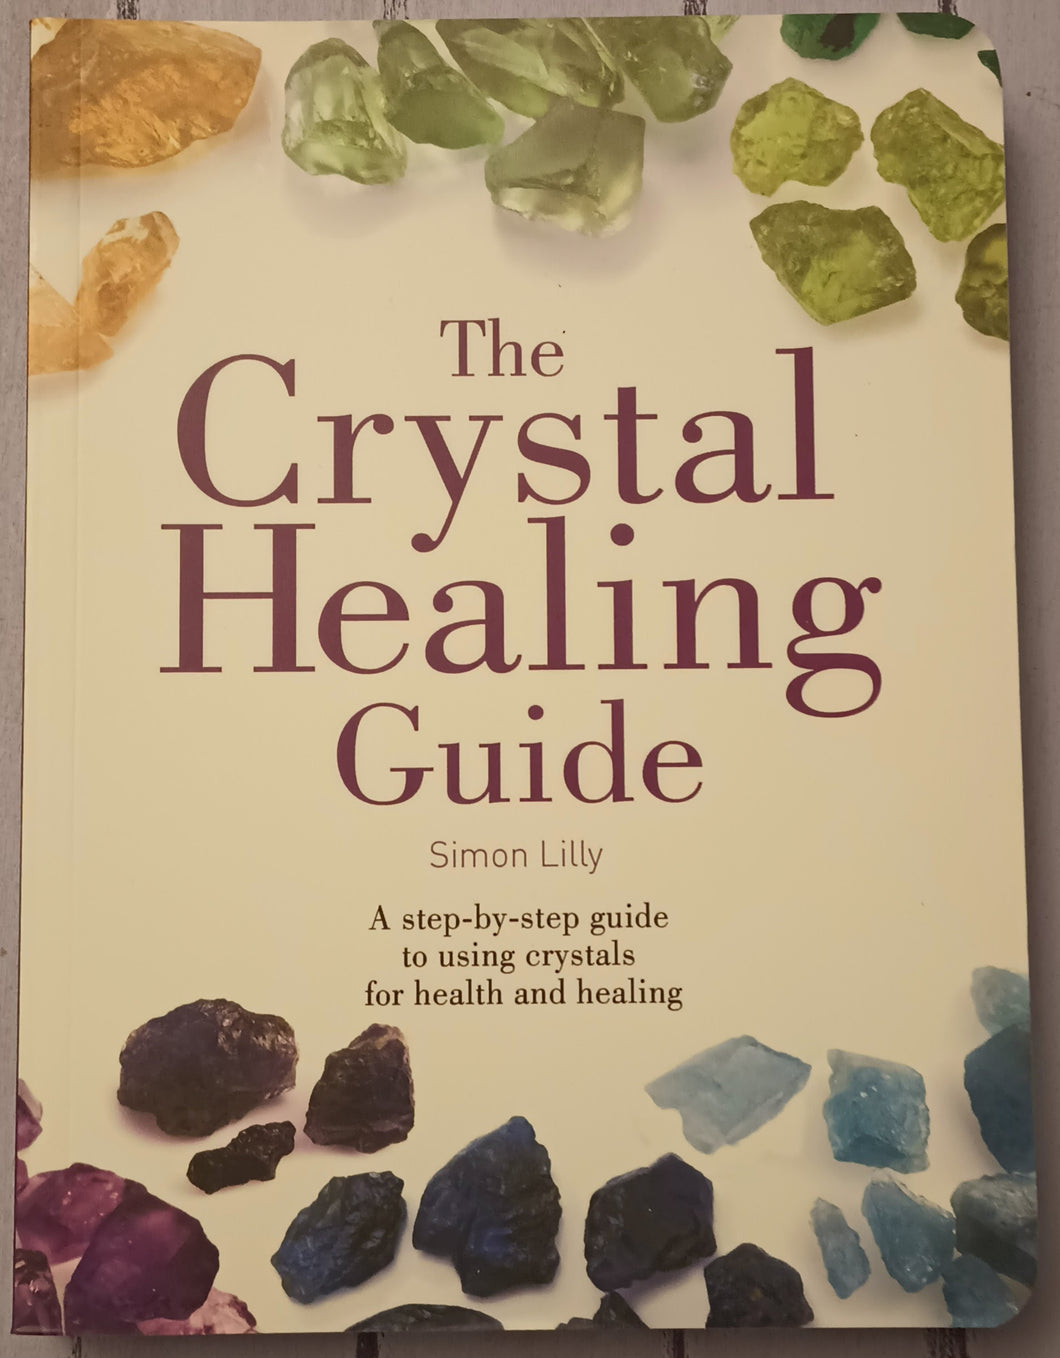 The Crystal Healing Guide: A step-by-step guide to using crystals for health and healing